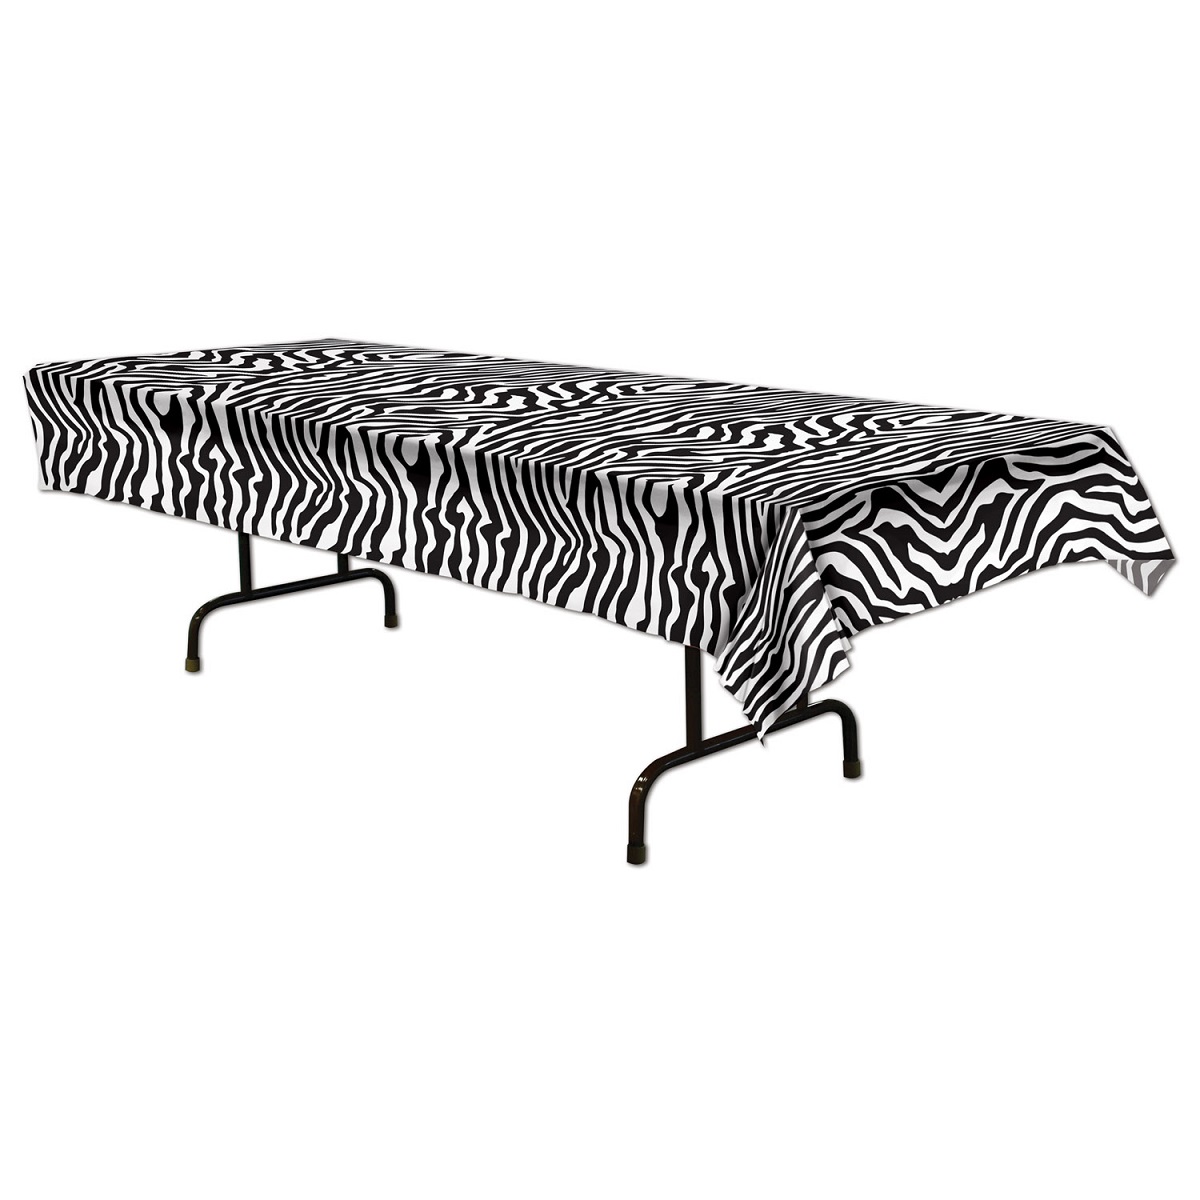 Party Central Club Pack of 12 Black and White Zebra Print Table Covers 108"